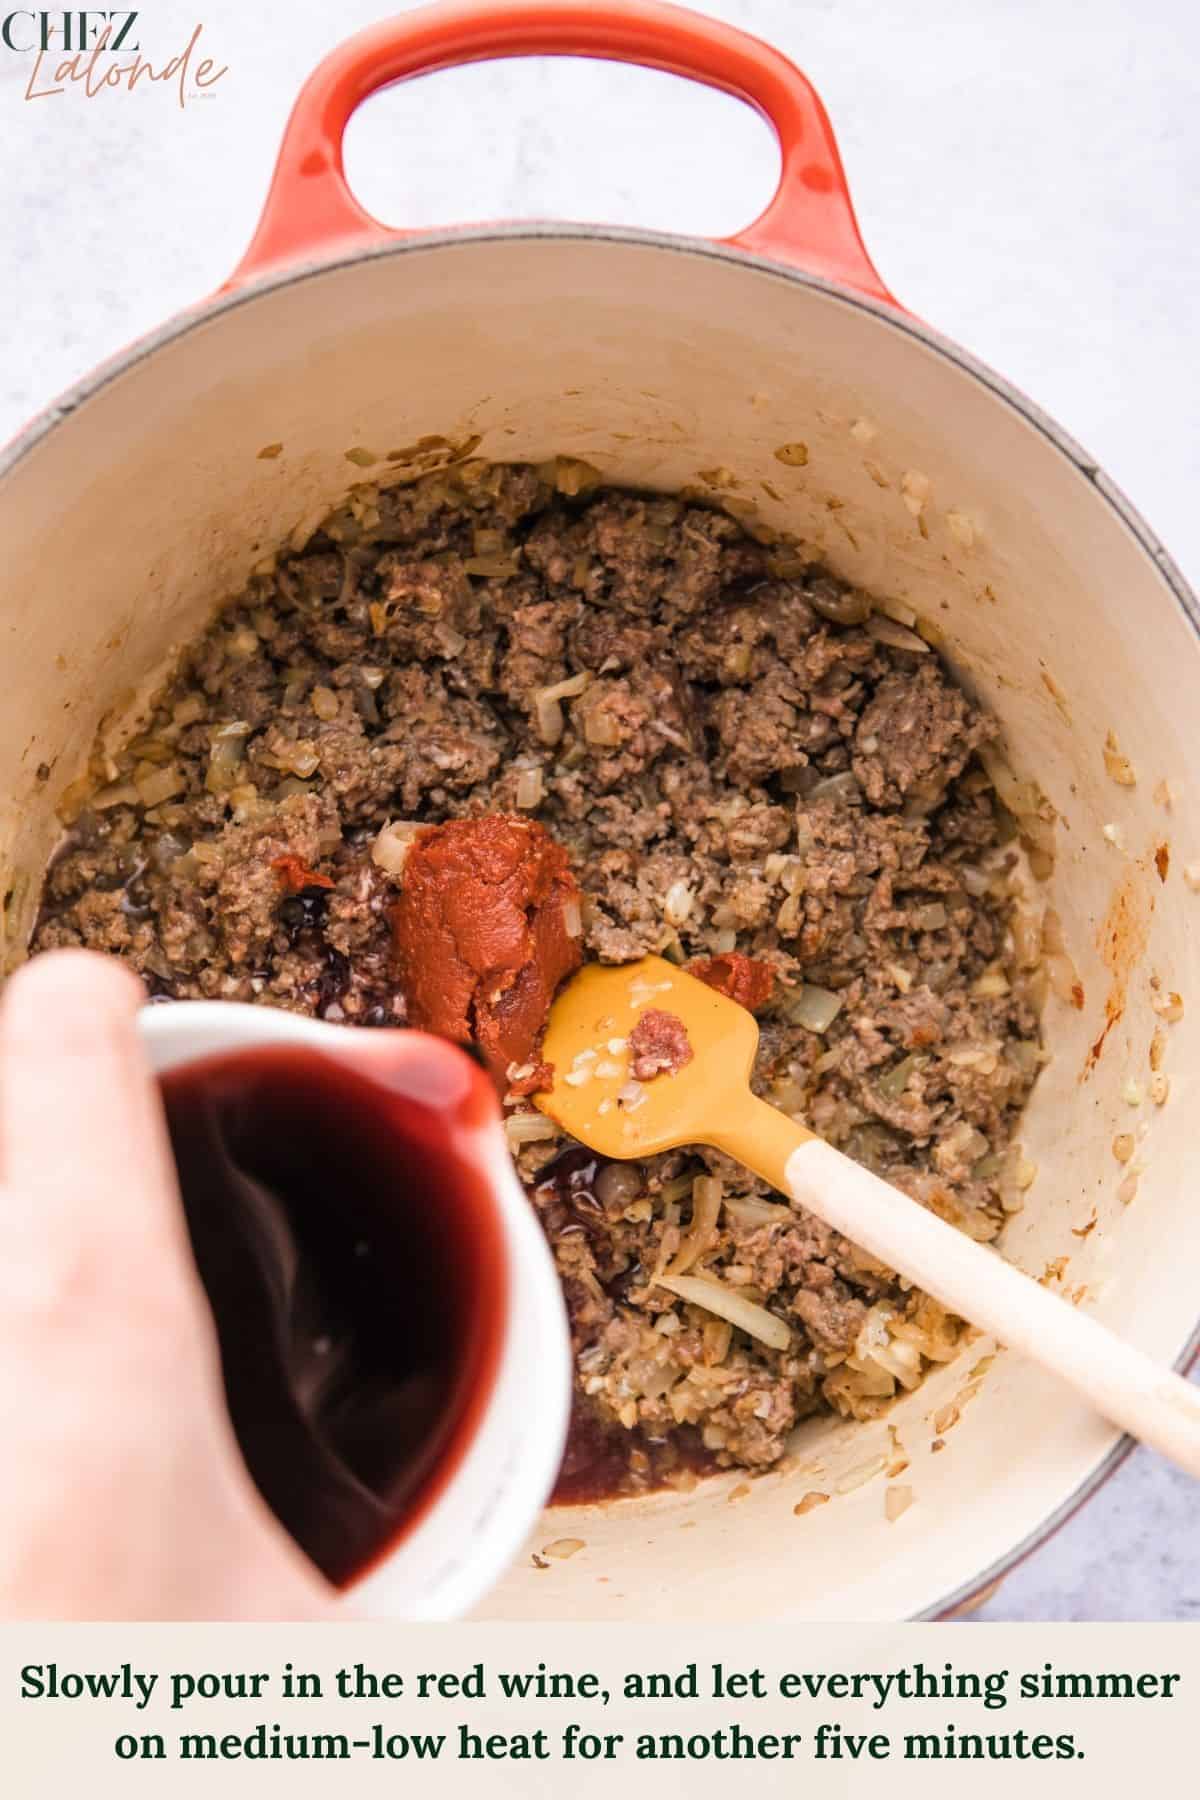 slowly pour in the red wine, and let everything simmer on medium-low heat for about five minutes. This will allow the alcohol to evaporate slowly and all the ingredients to blend together.
